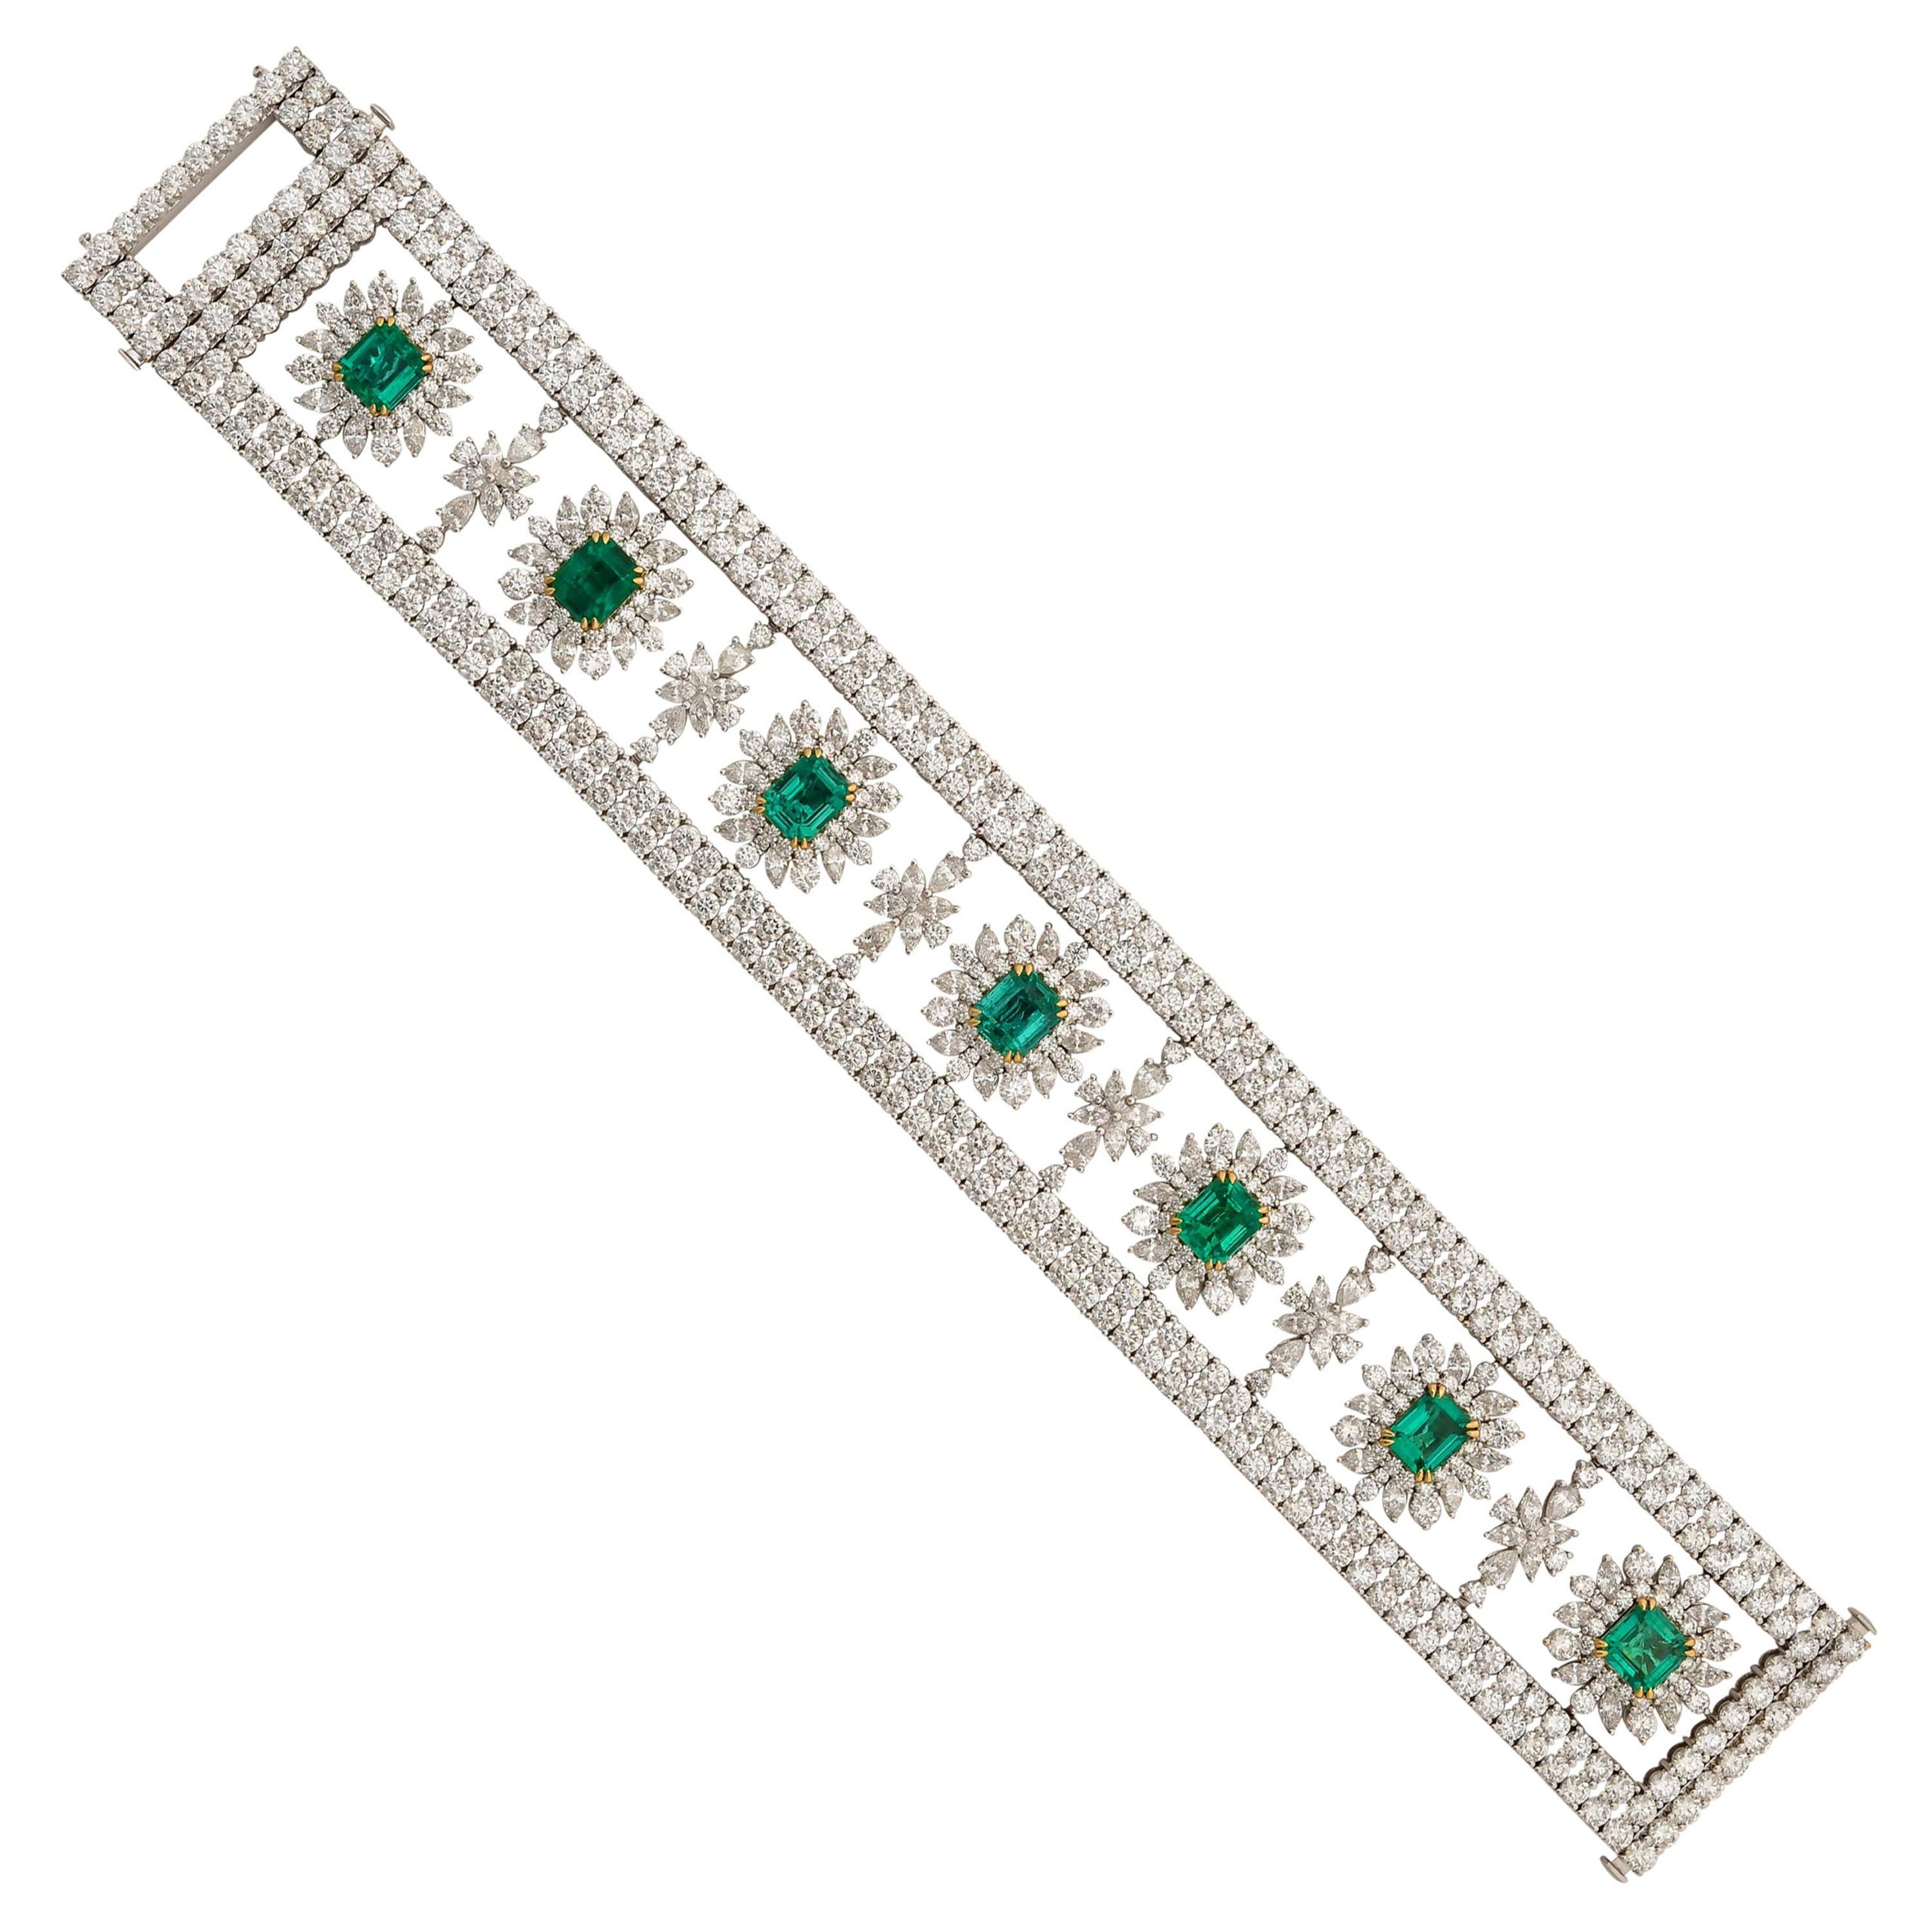 8.526 Carat Emerald Bracelet and Necklace in 18 Karat White Gold with Diamonds For Sale